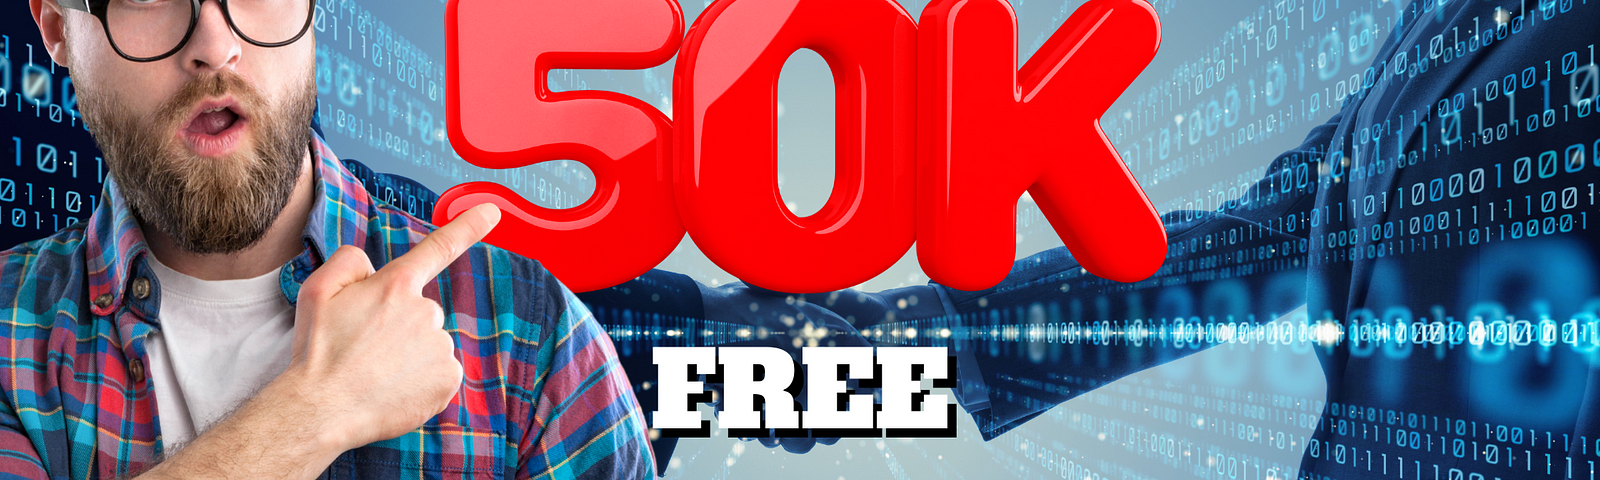 How To Get 50,000 Free Visitors Fast Right Now